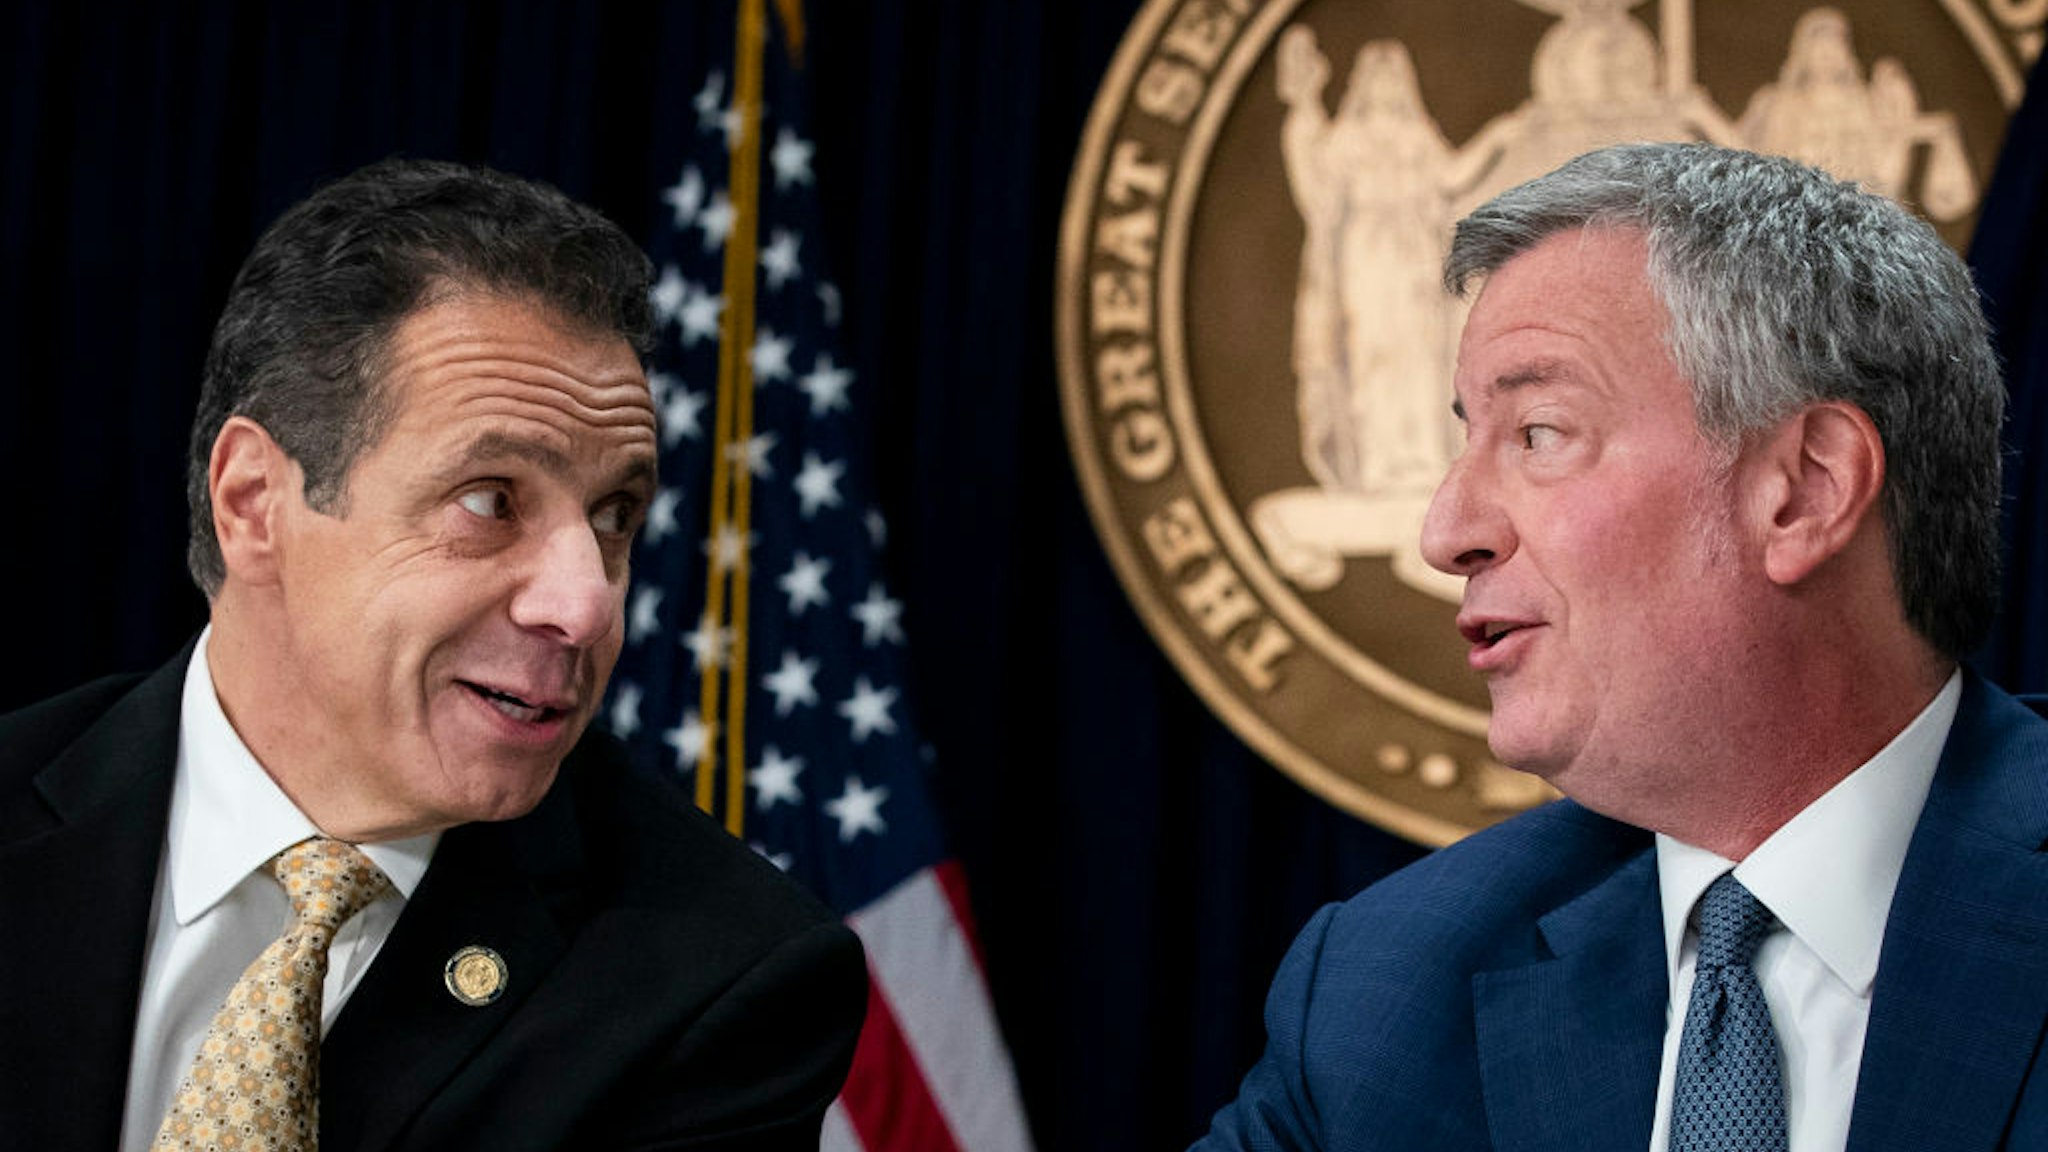 New York Governor Andrew Cuomo and New York City Mayor Bill de Blasio talk with each other during a press conference to discuss Amazon's decision to bring a new corporate location to New York City, November 13, 2018 in New York City.